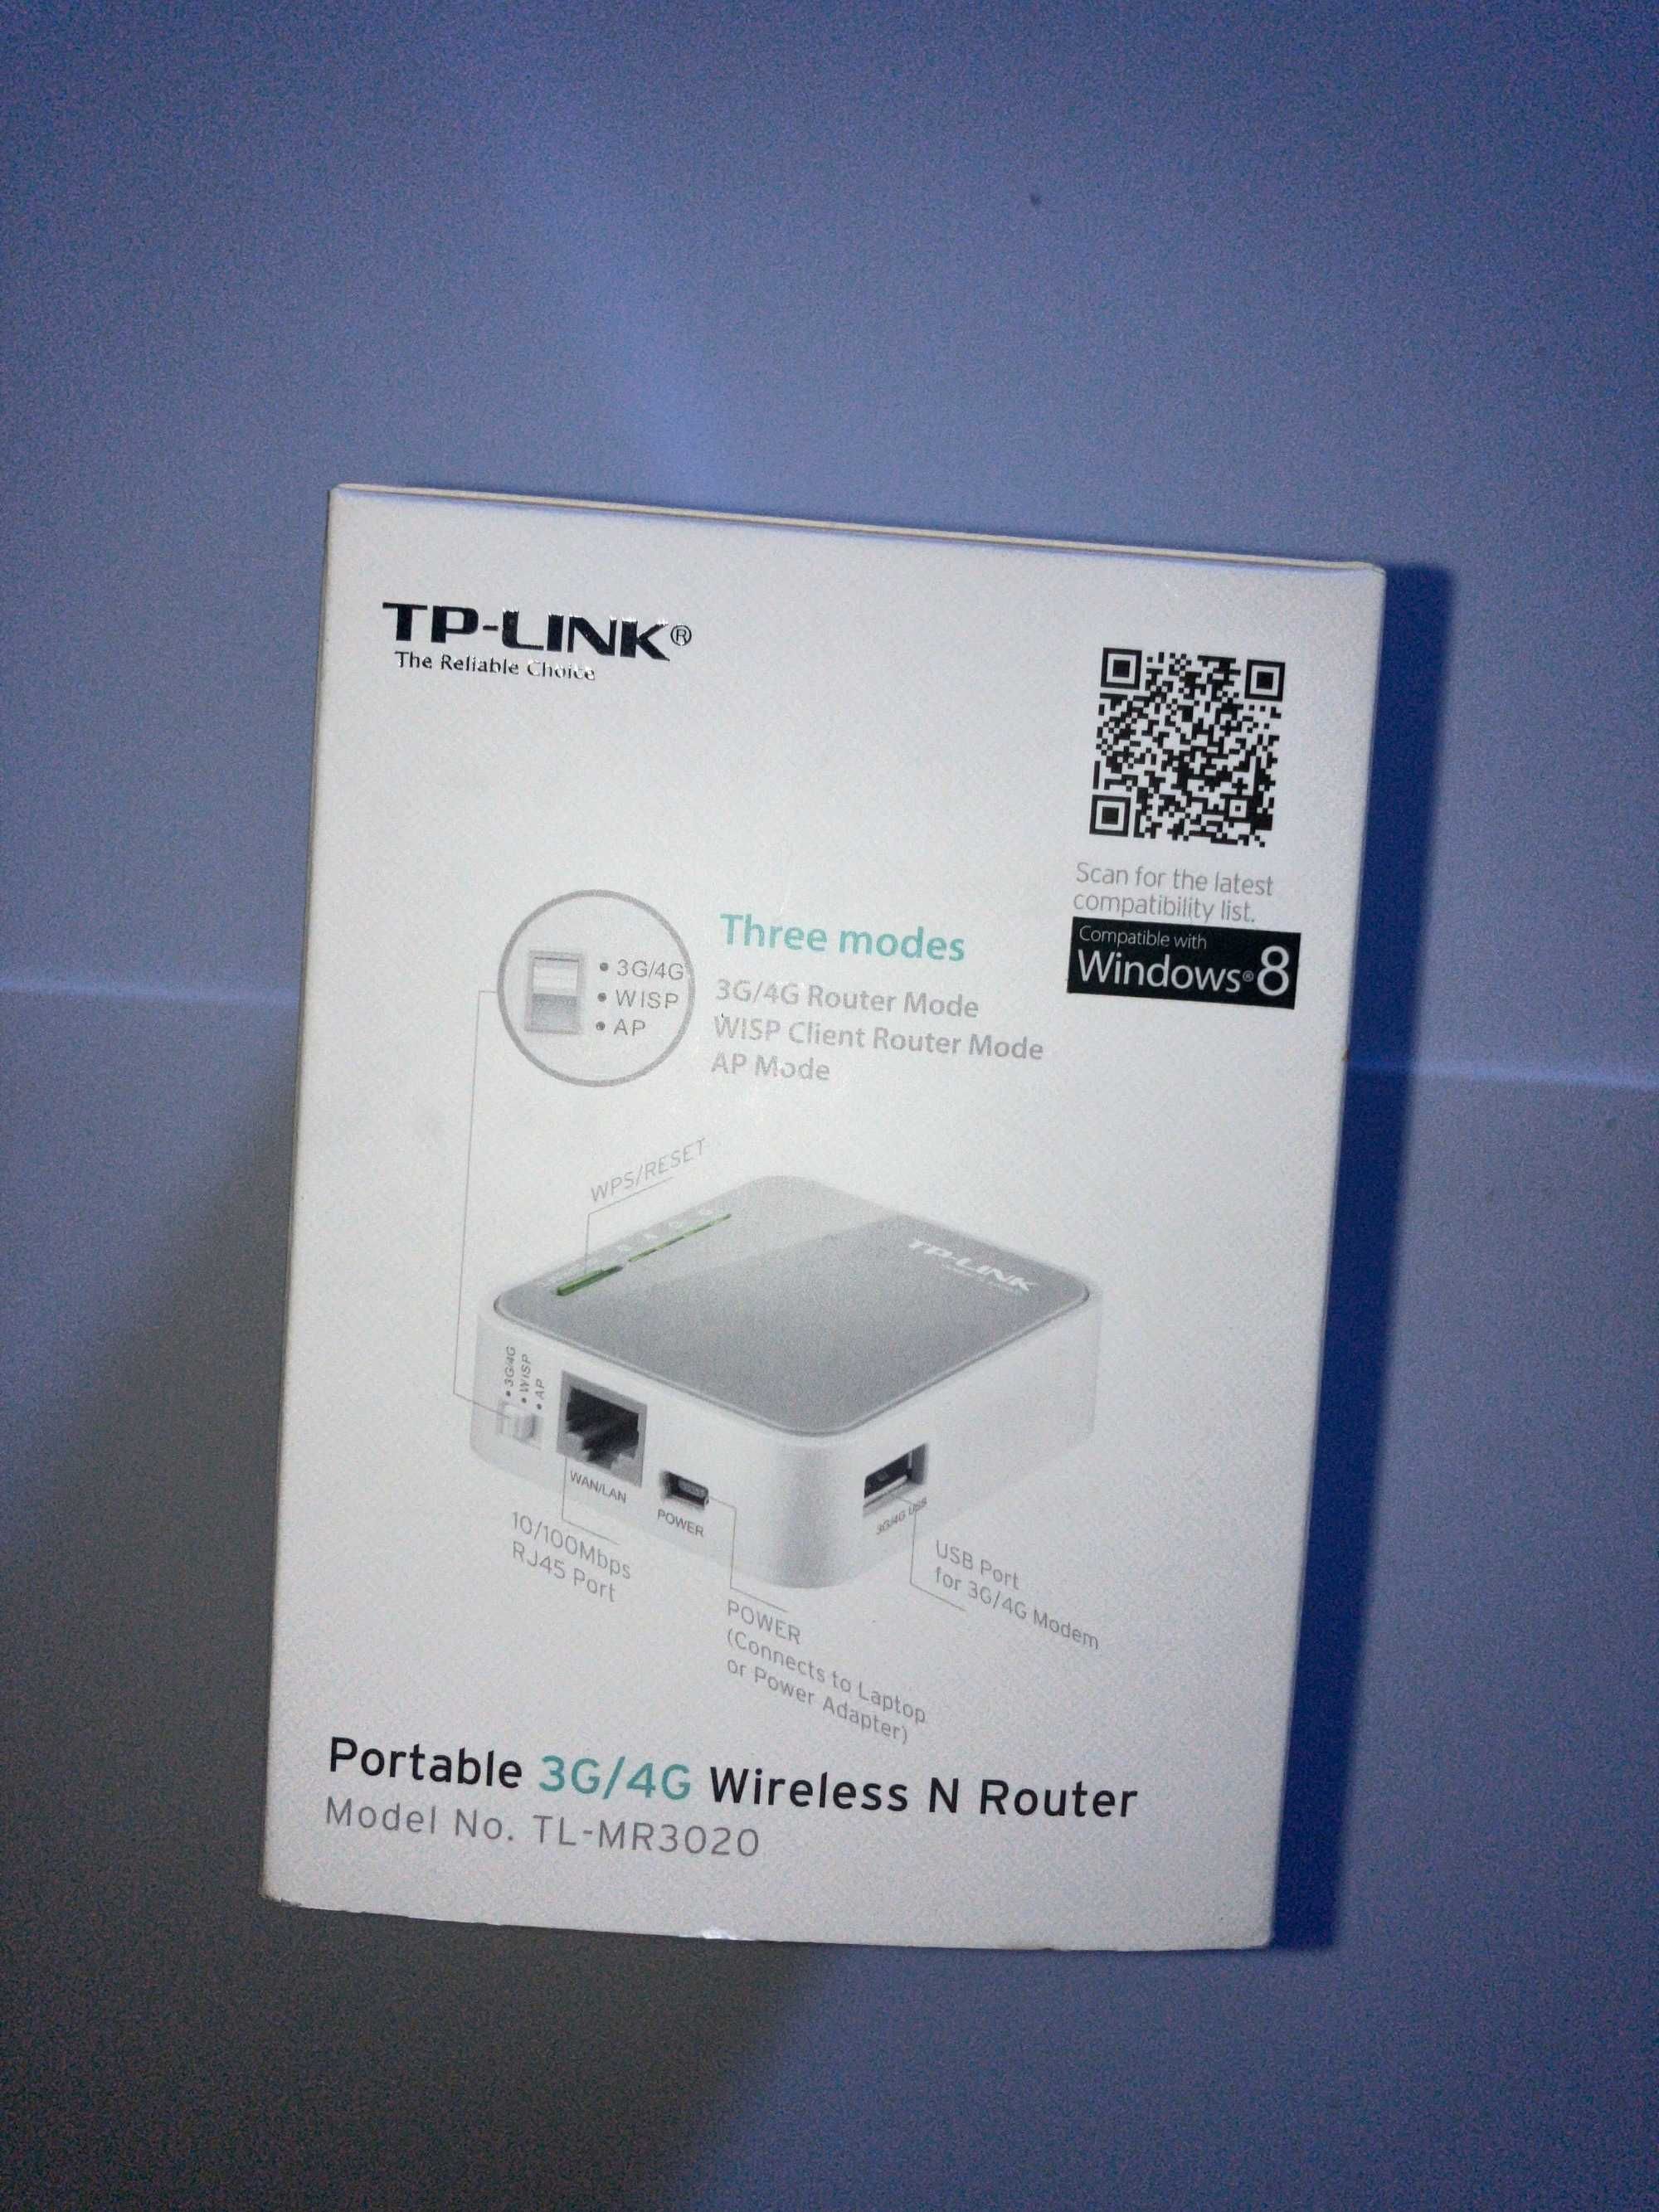 TP-LINK Wireless N Router TL-MR3020